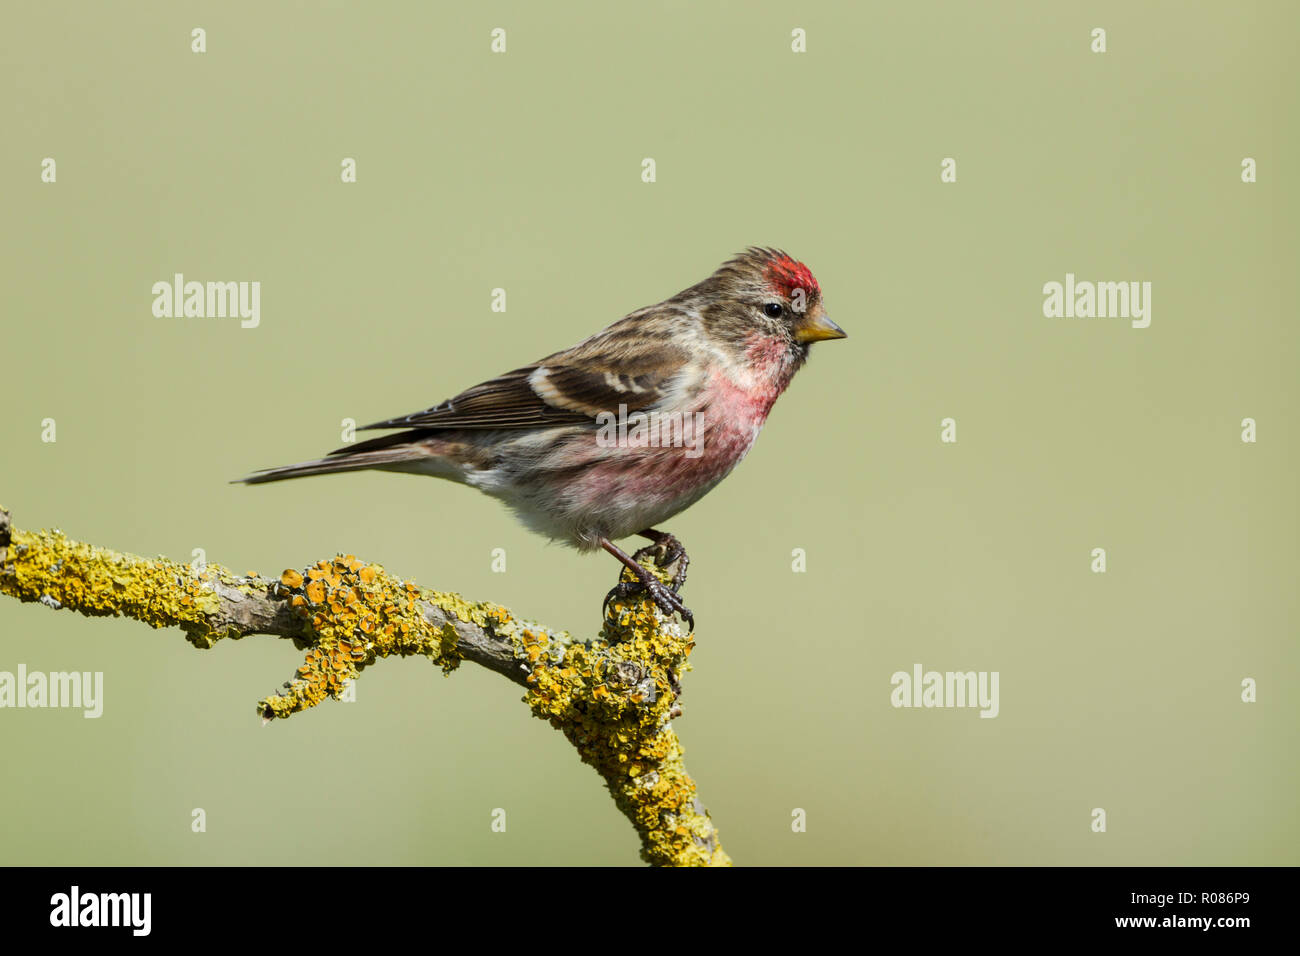 Common redpoll, Latin name Carduelis flammea, perched on a lichen covered twig, set against a pale green backgournd Stock Photo